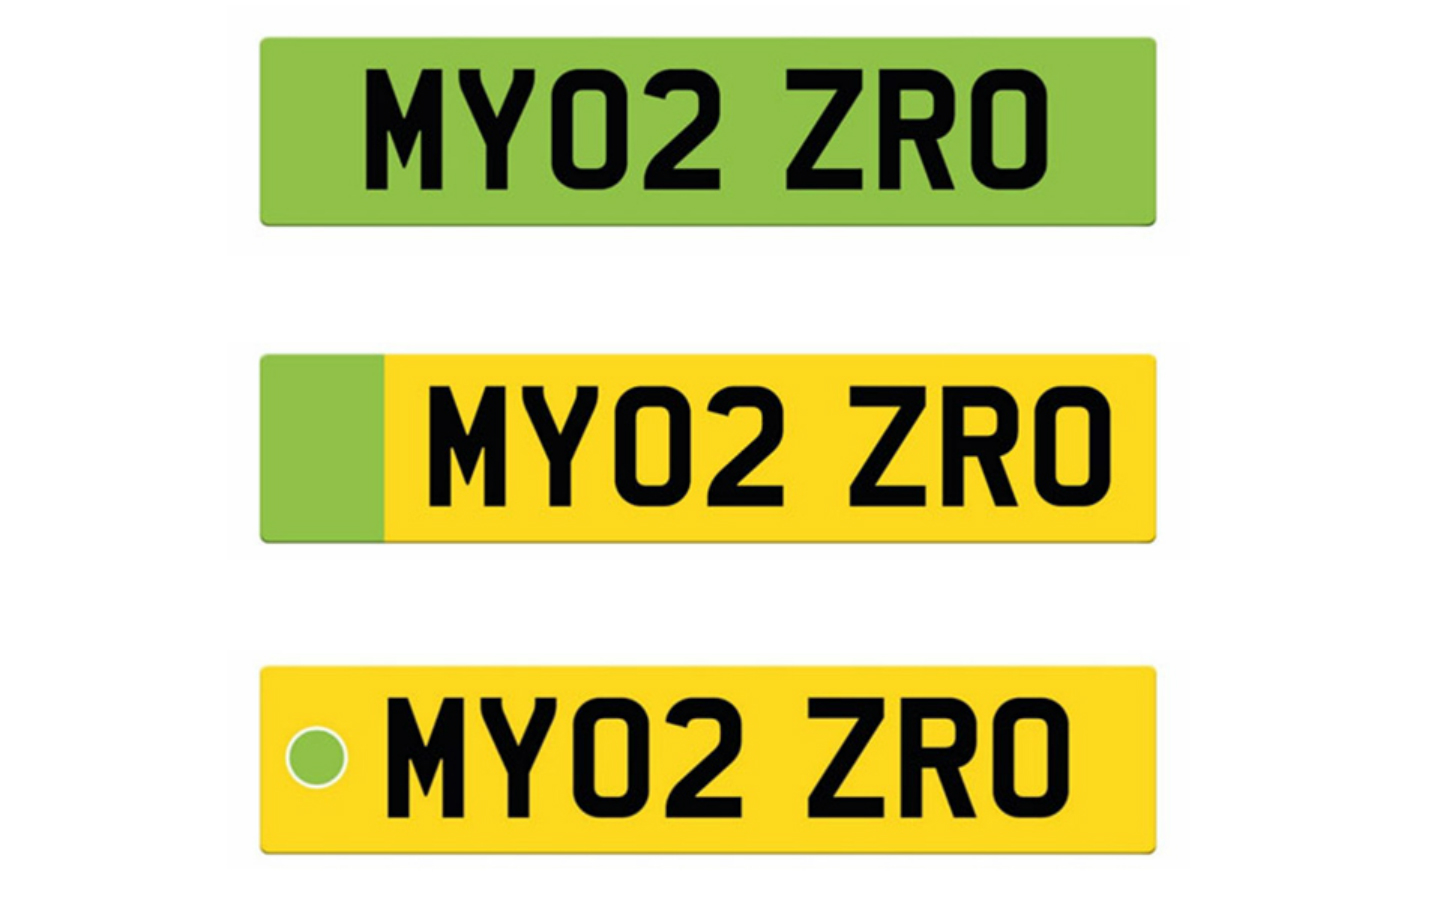 Department for Transport electric car green number plate design ideas